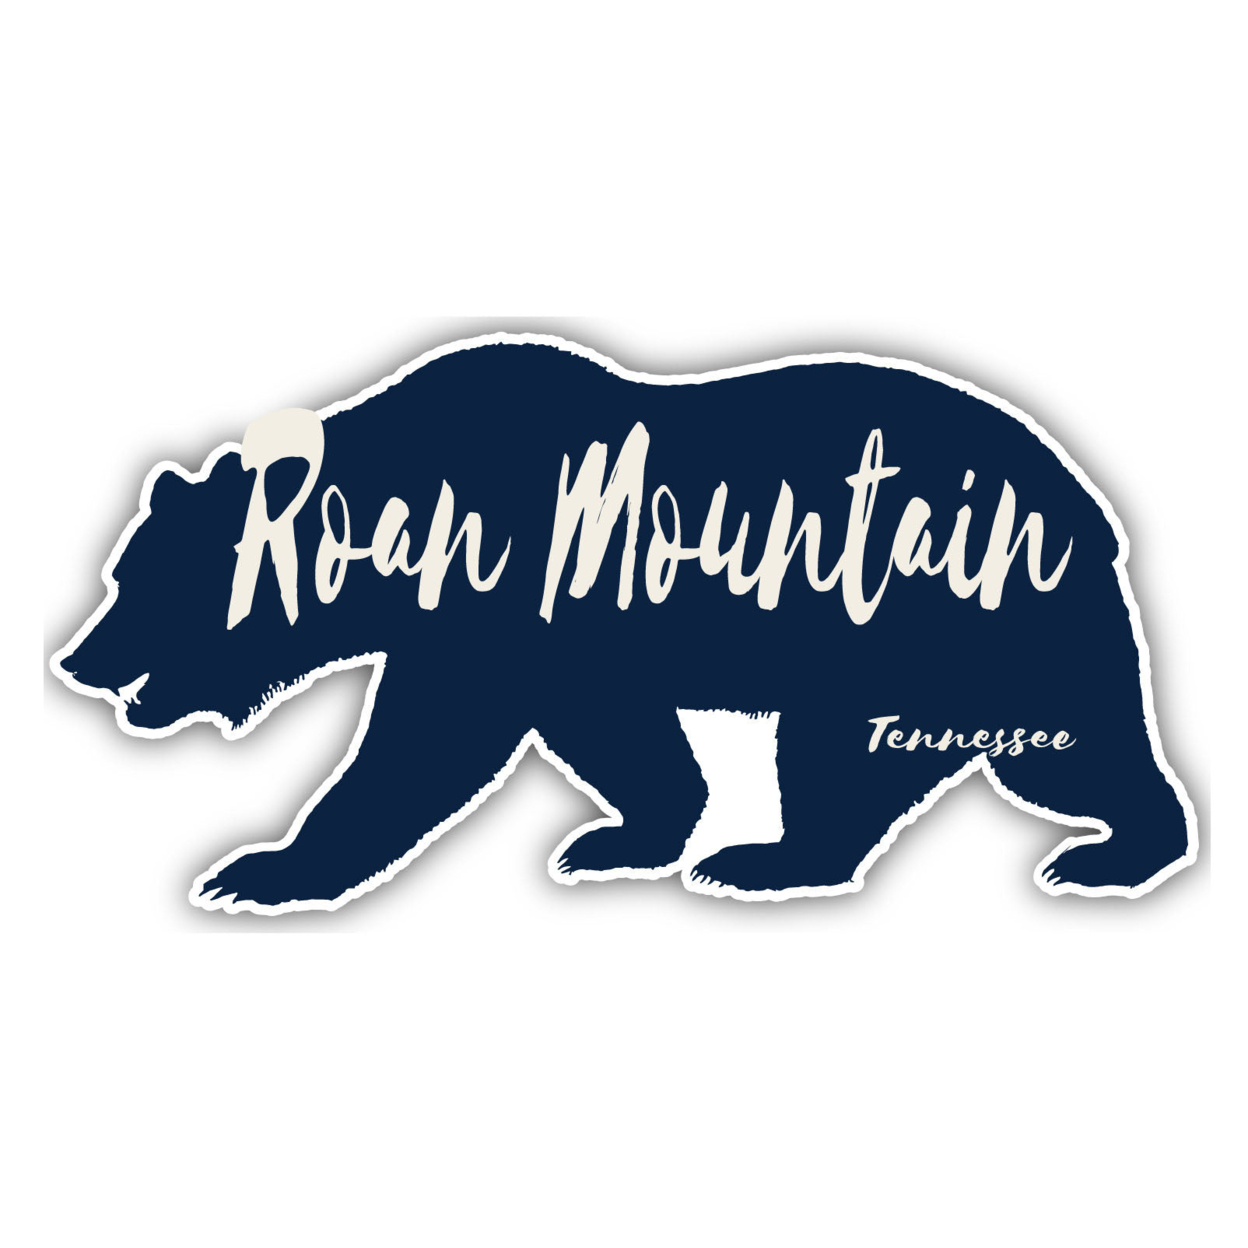 Roan Mountain Tennessee Souvenir Decorative Stickers (Choose Theme And Size) - Single Unit, 2-Inch, Bear